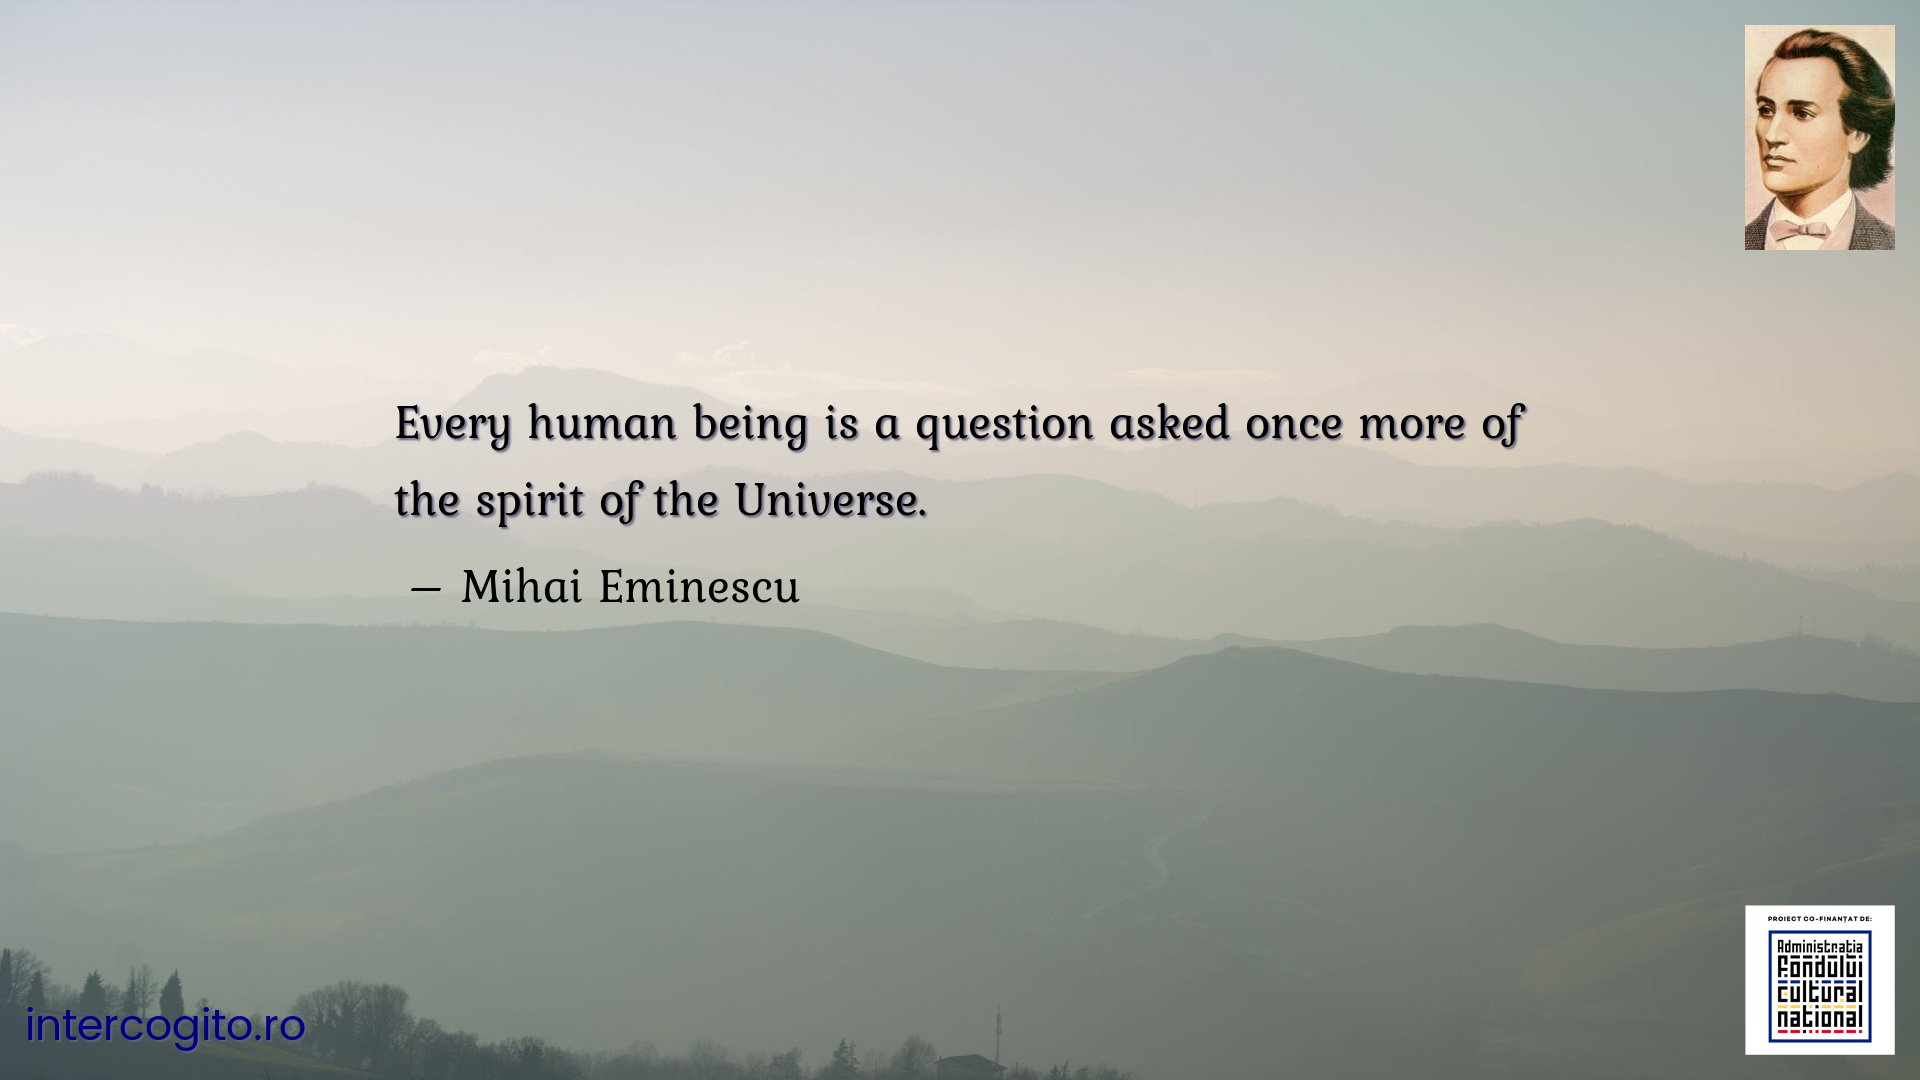 Every human being is a question asked once more of the spirit of the Universe.